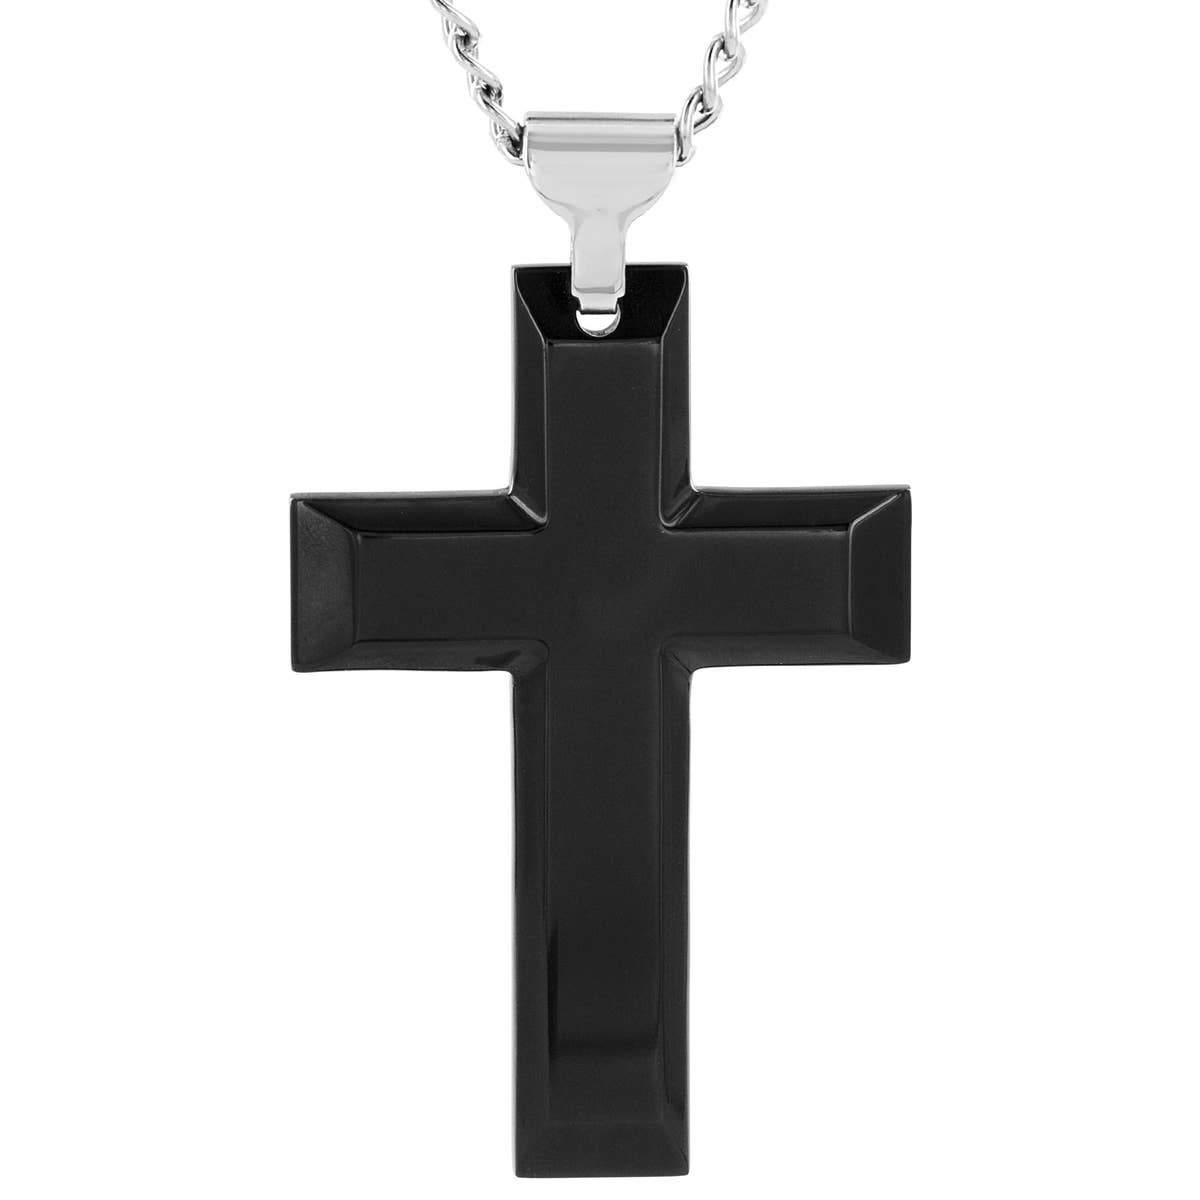 Crucible Black Plated Cross Pendant Necklace - Fruit of the Vine